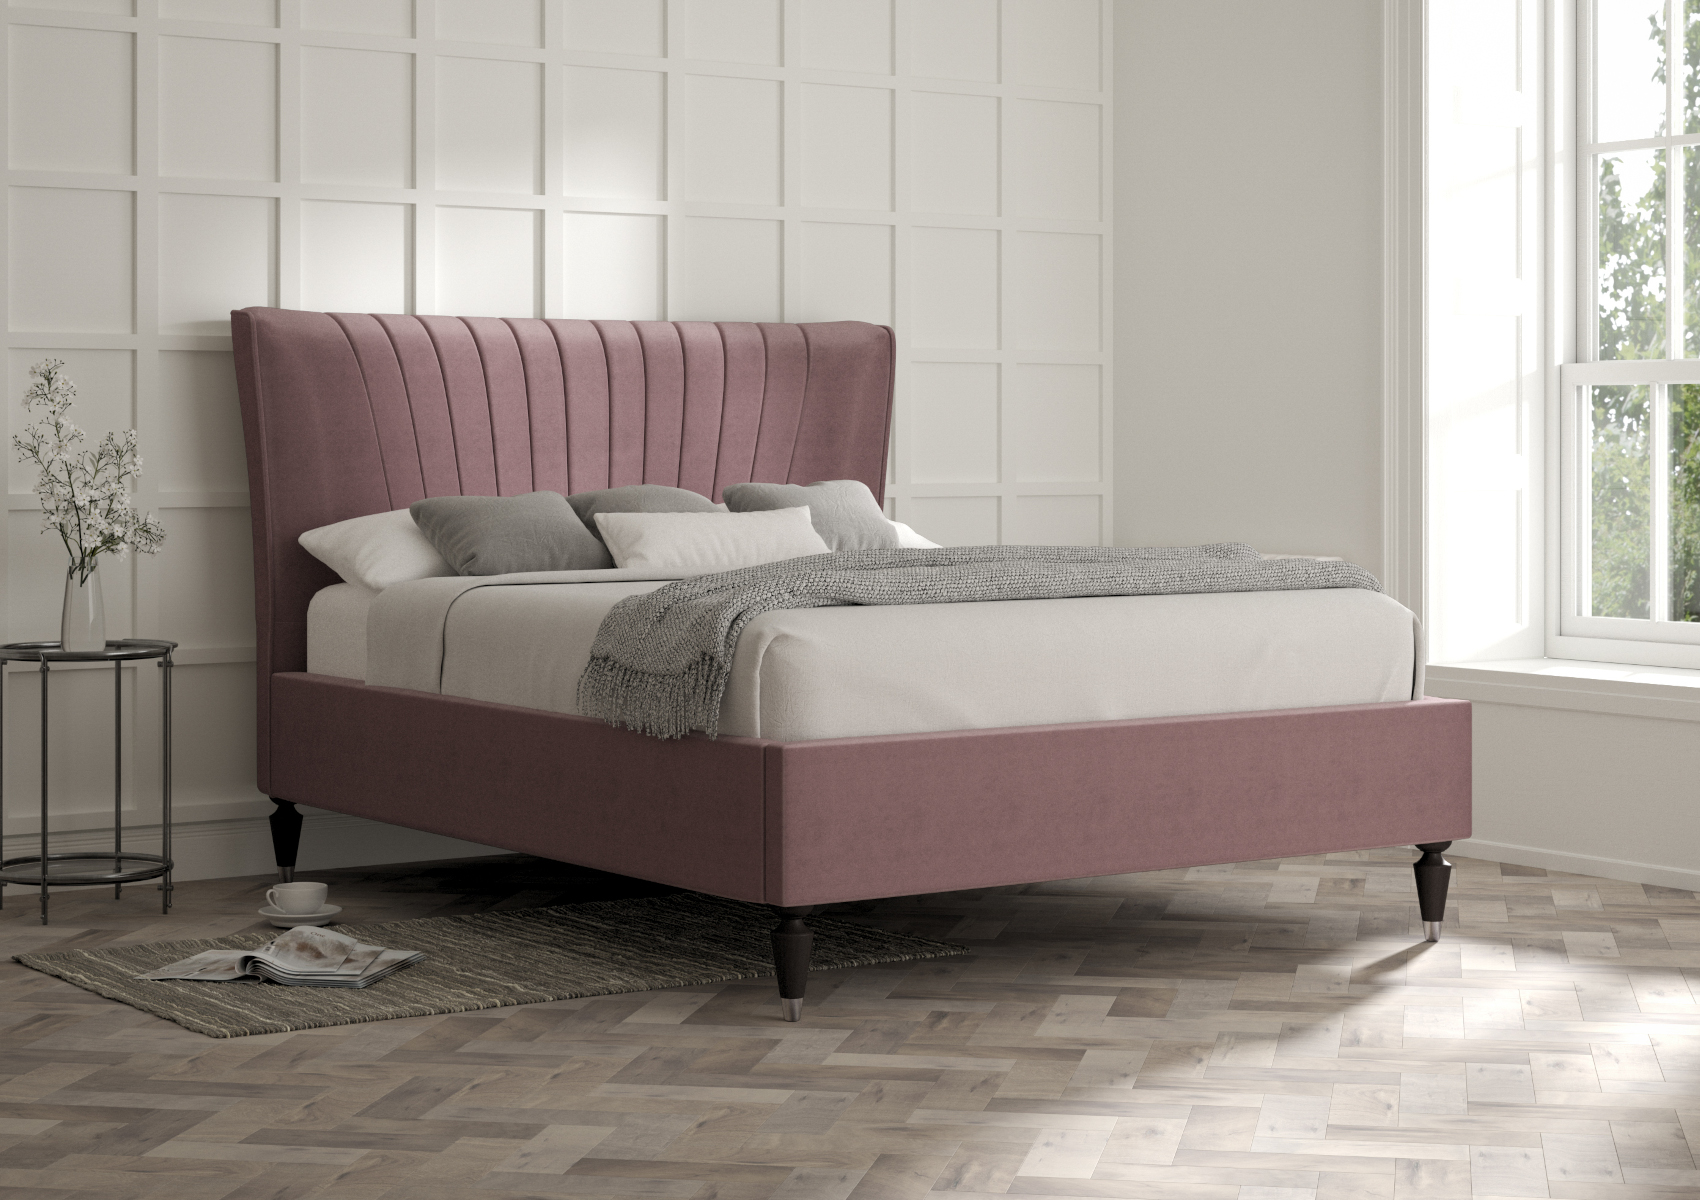 View Melbury Arran Natural Upholstered Single Bed Time4Sleep information